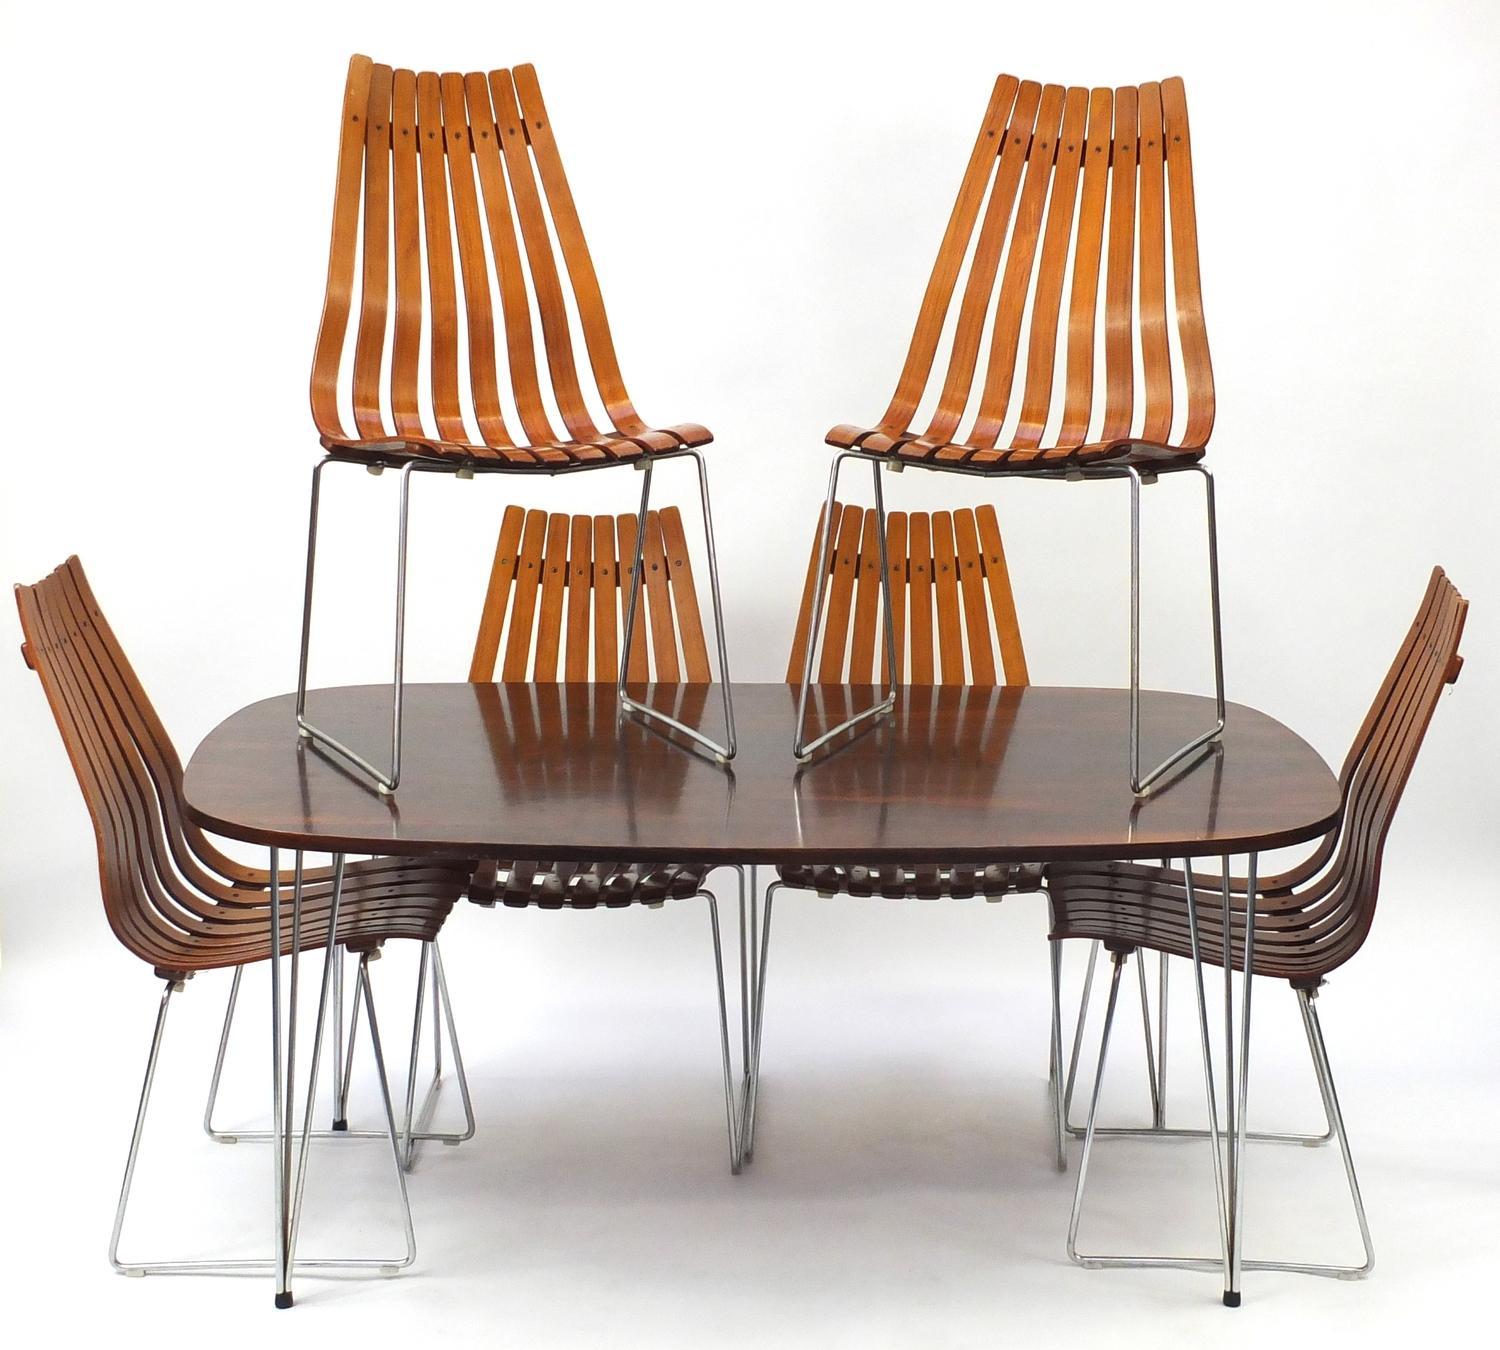 Hans Brattrud Rosewood Dining Table & Six Scandia Chairs, Hove Mobler circa 1965 im Zustand „Gut“ in Longdon, Tewkesbury